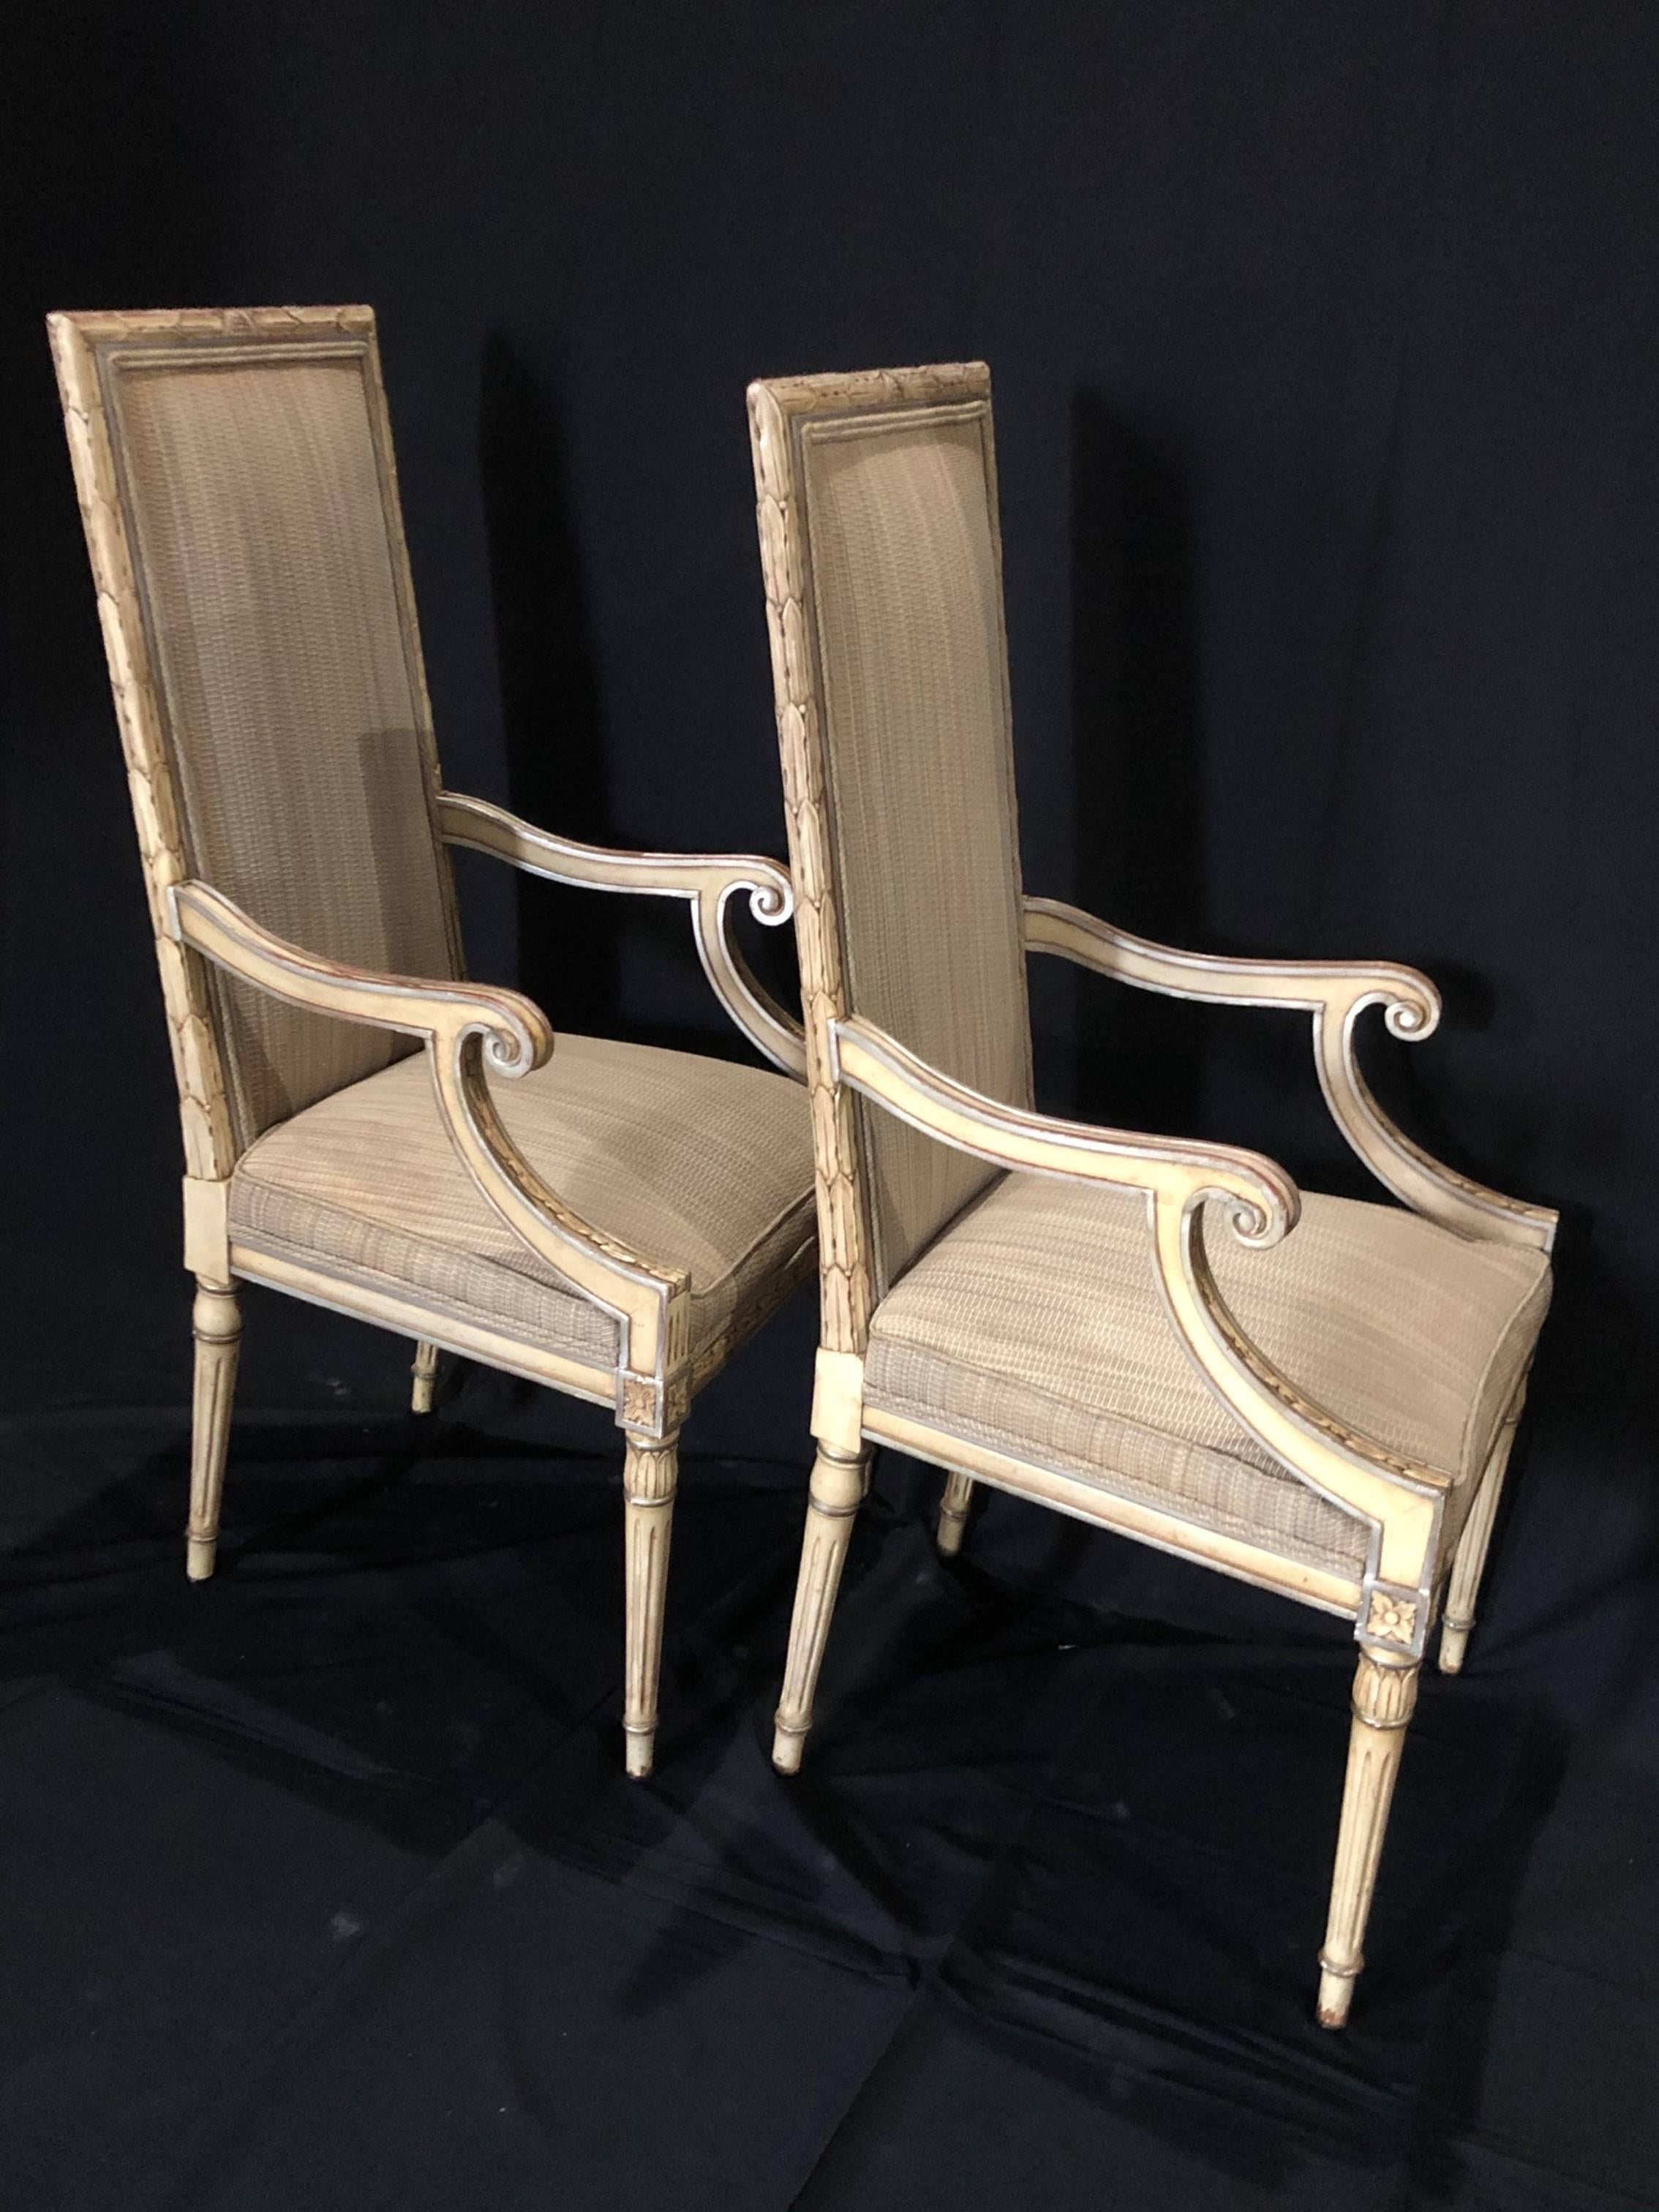 Stunning Pair of Louis XVI Style Painted and Upholstered Neoclassical Armchairs 1